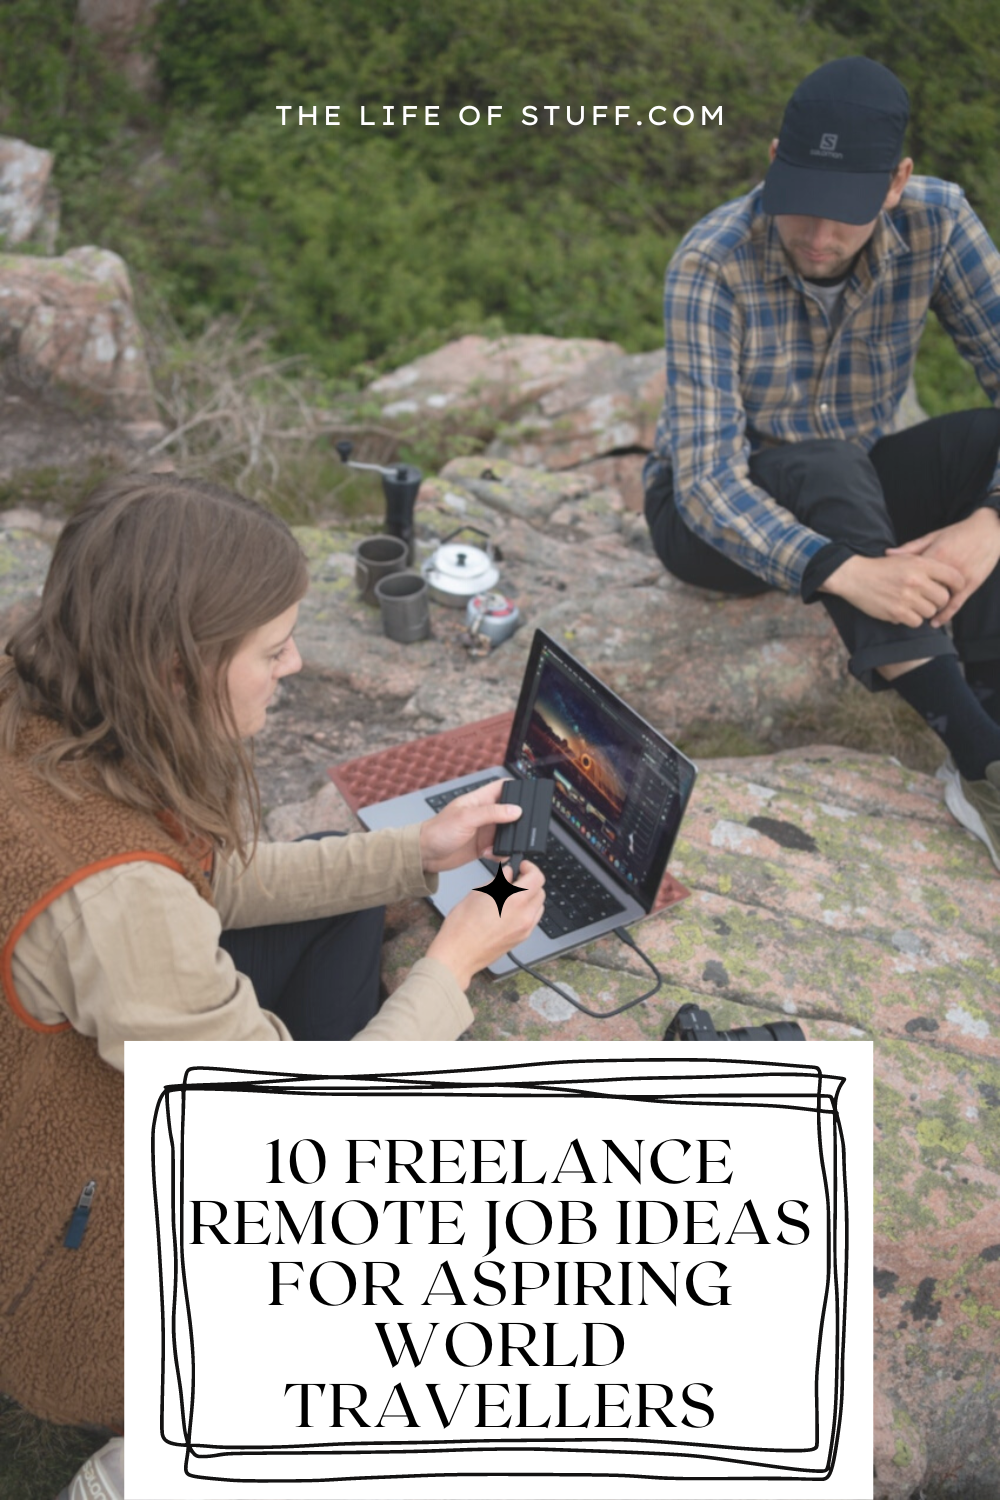 10 Freelance Remote Job Ideas for Aspiring World Travellers - The Life of Stuff